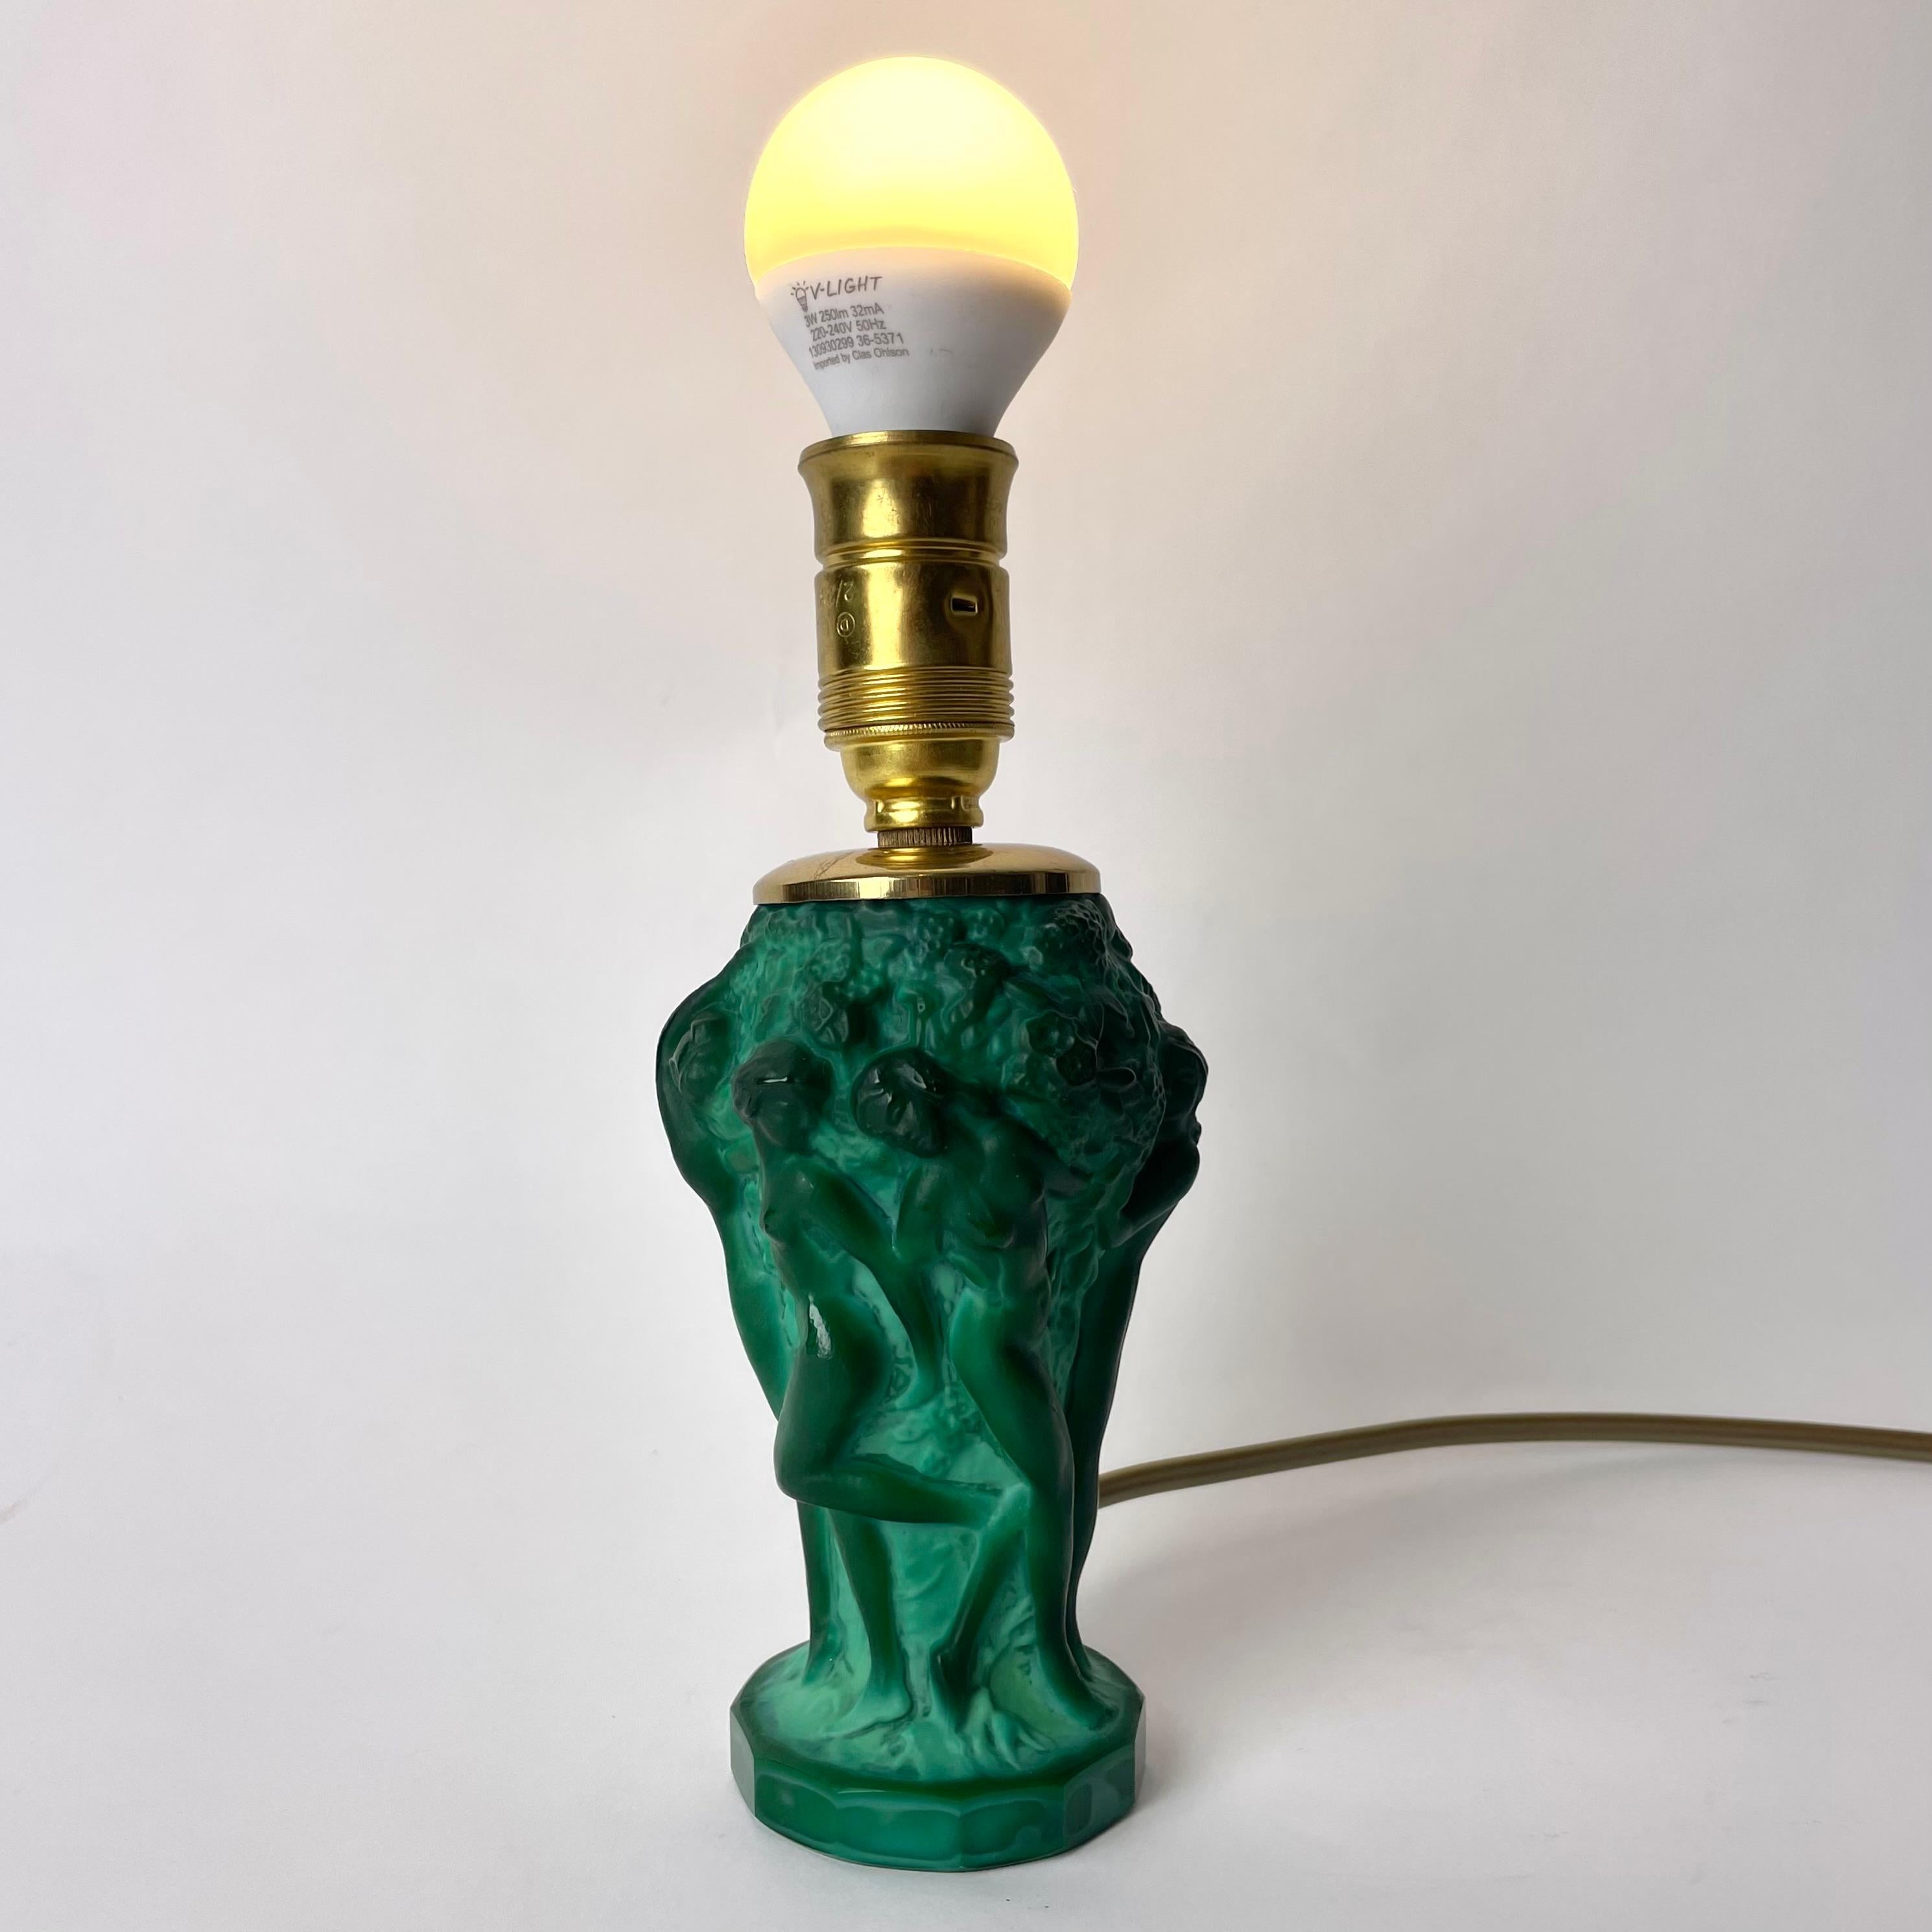 Beautiful small glass Table Lamp in period Art Deco. Designed by Heinrich Hoffman (1875-1939) & Curt Schlevogt (1869-1959) from Czechoslovakia during the 1930s. A parade of female nudes appear around the body of the lamp harvesting grapes from